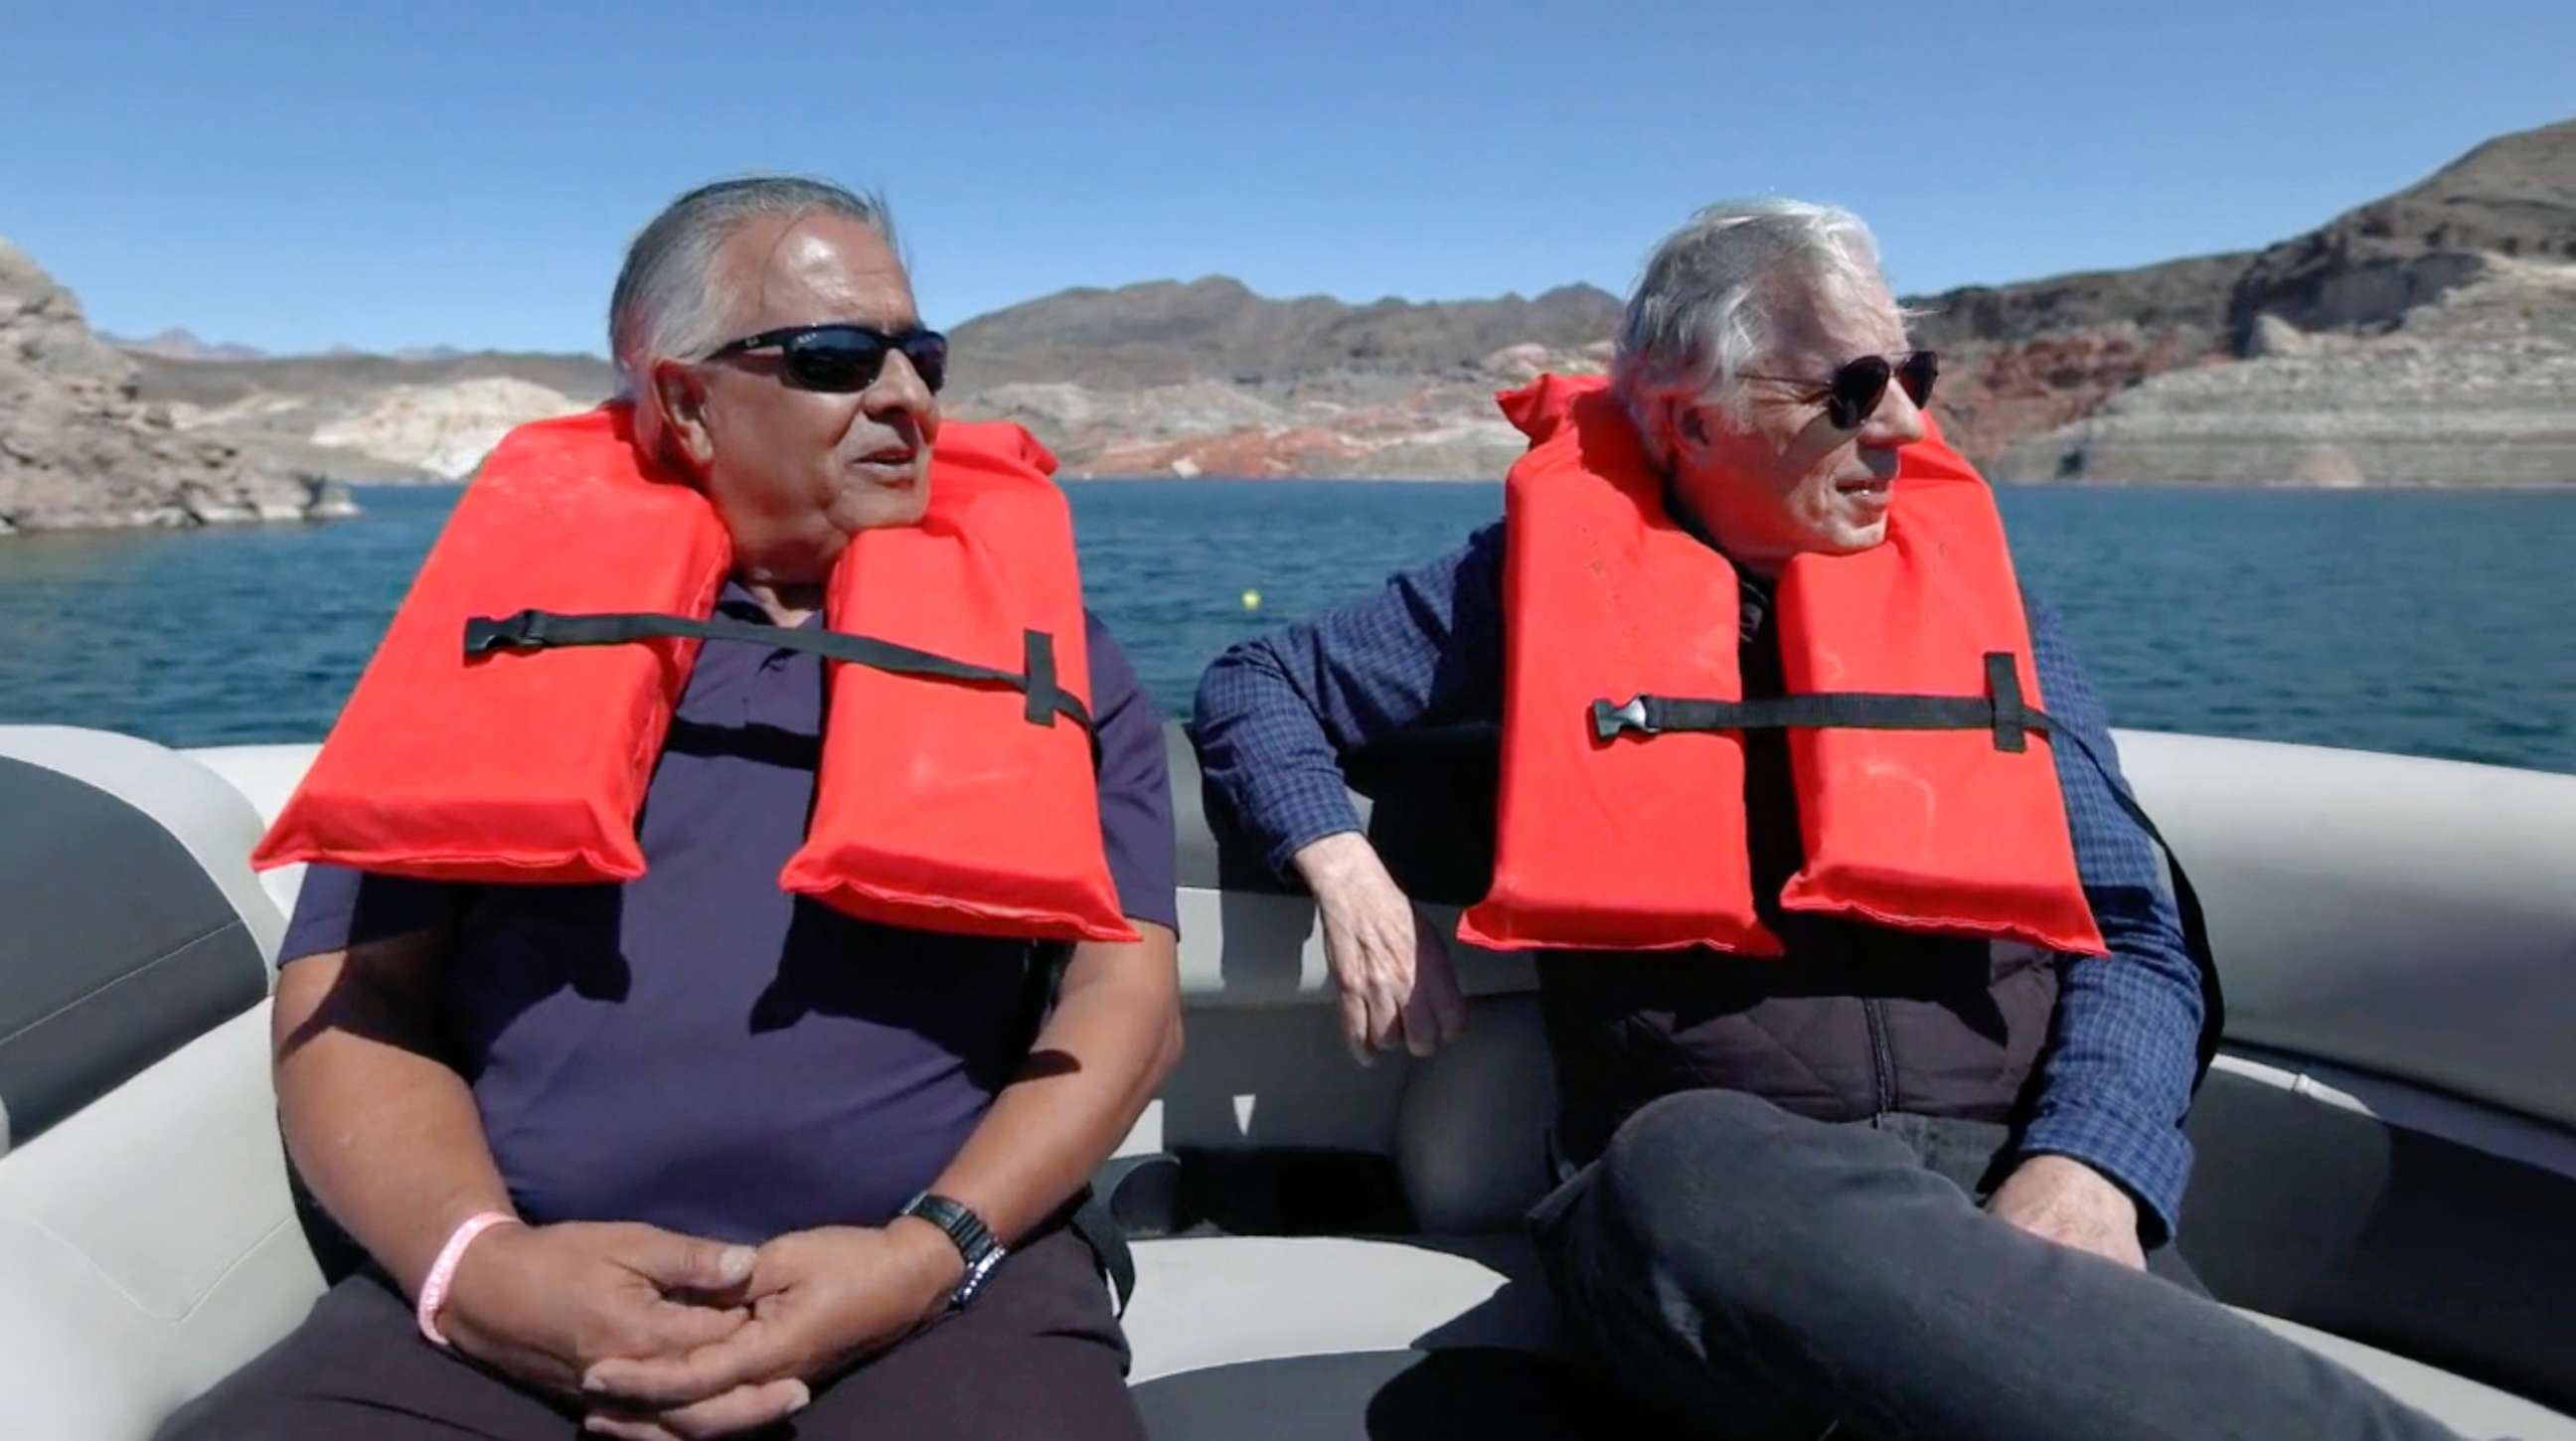 PHOTO: Las Vegas homicide detective Phil Ramos is shown with ABC News' Chris Connelly on a boat in Lake Mead.